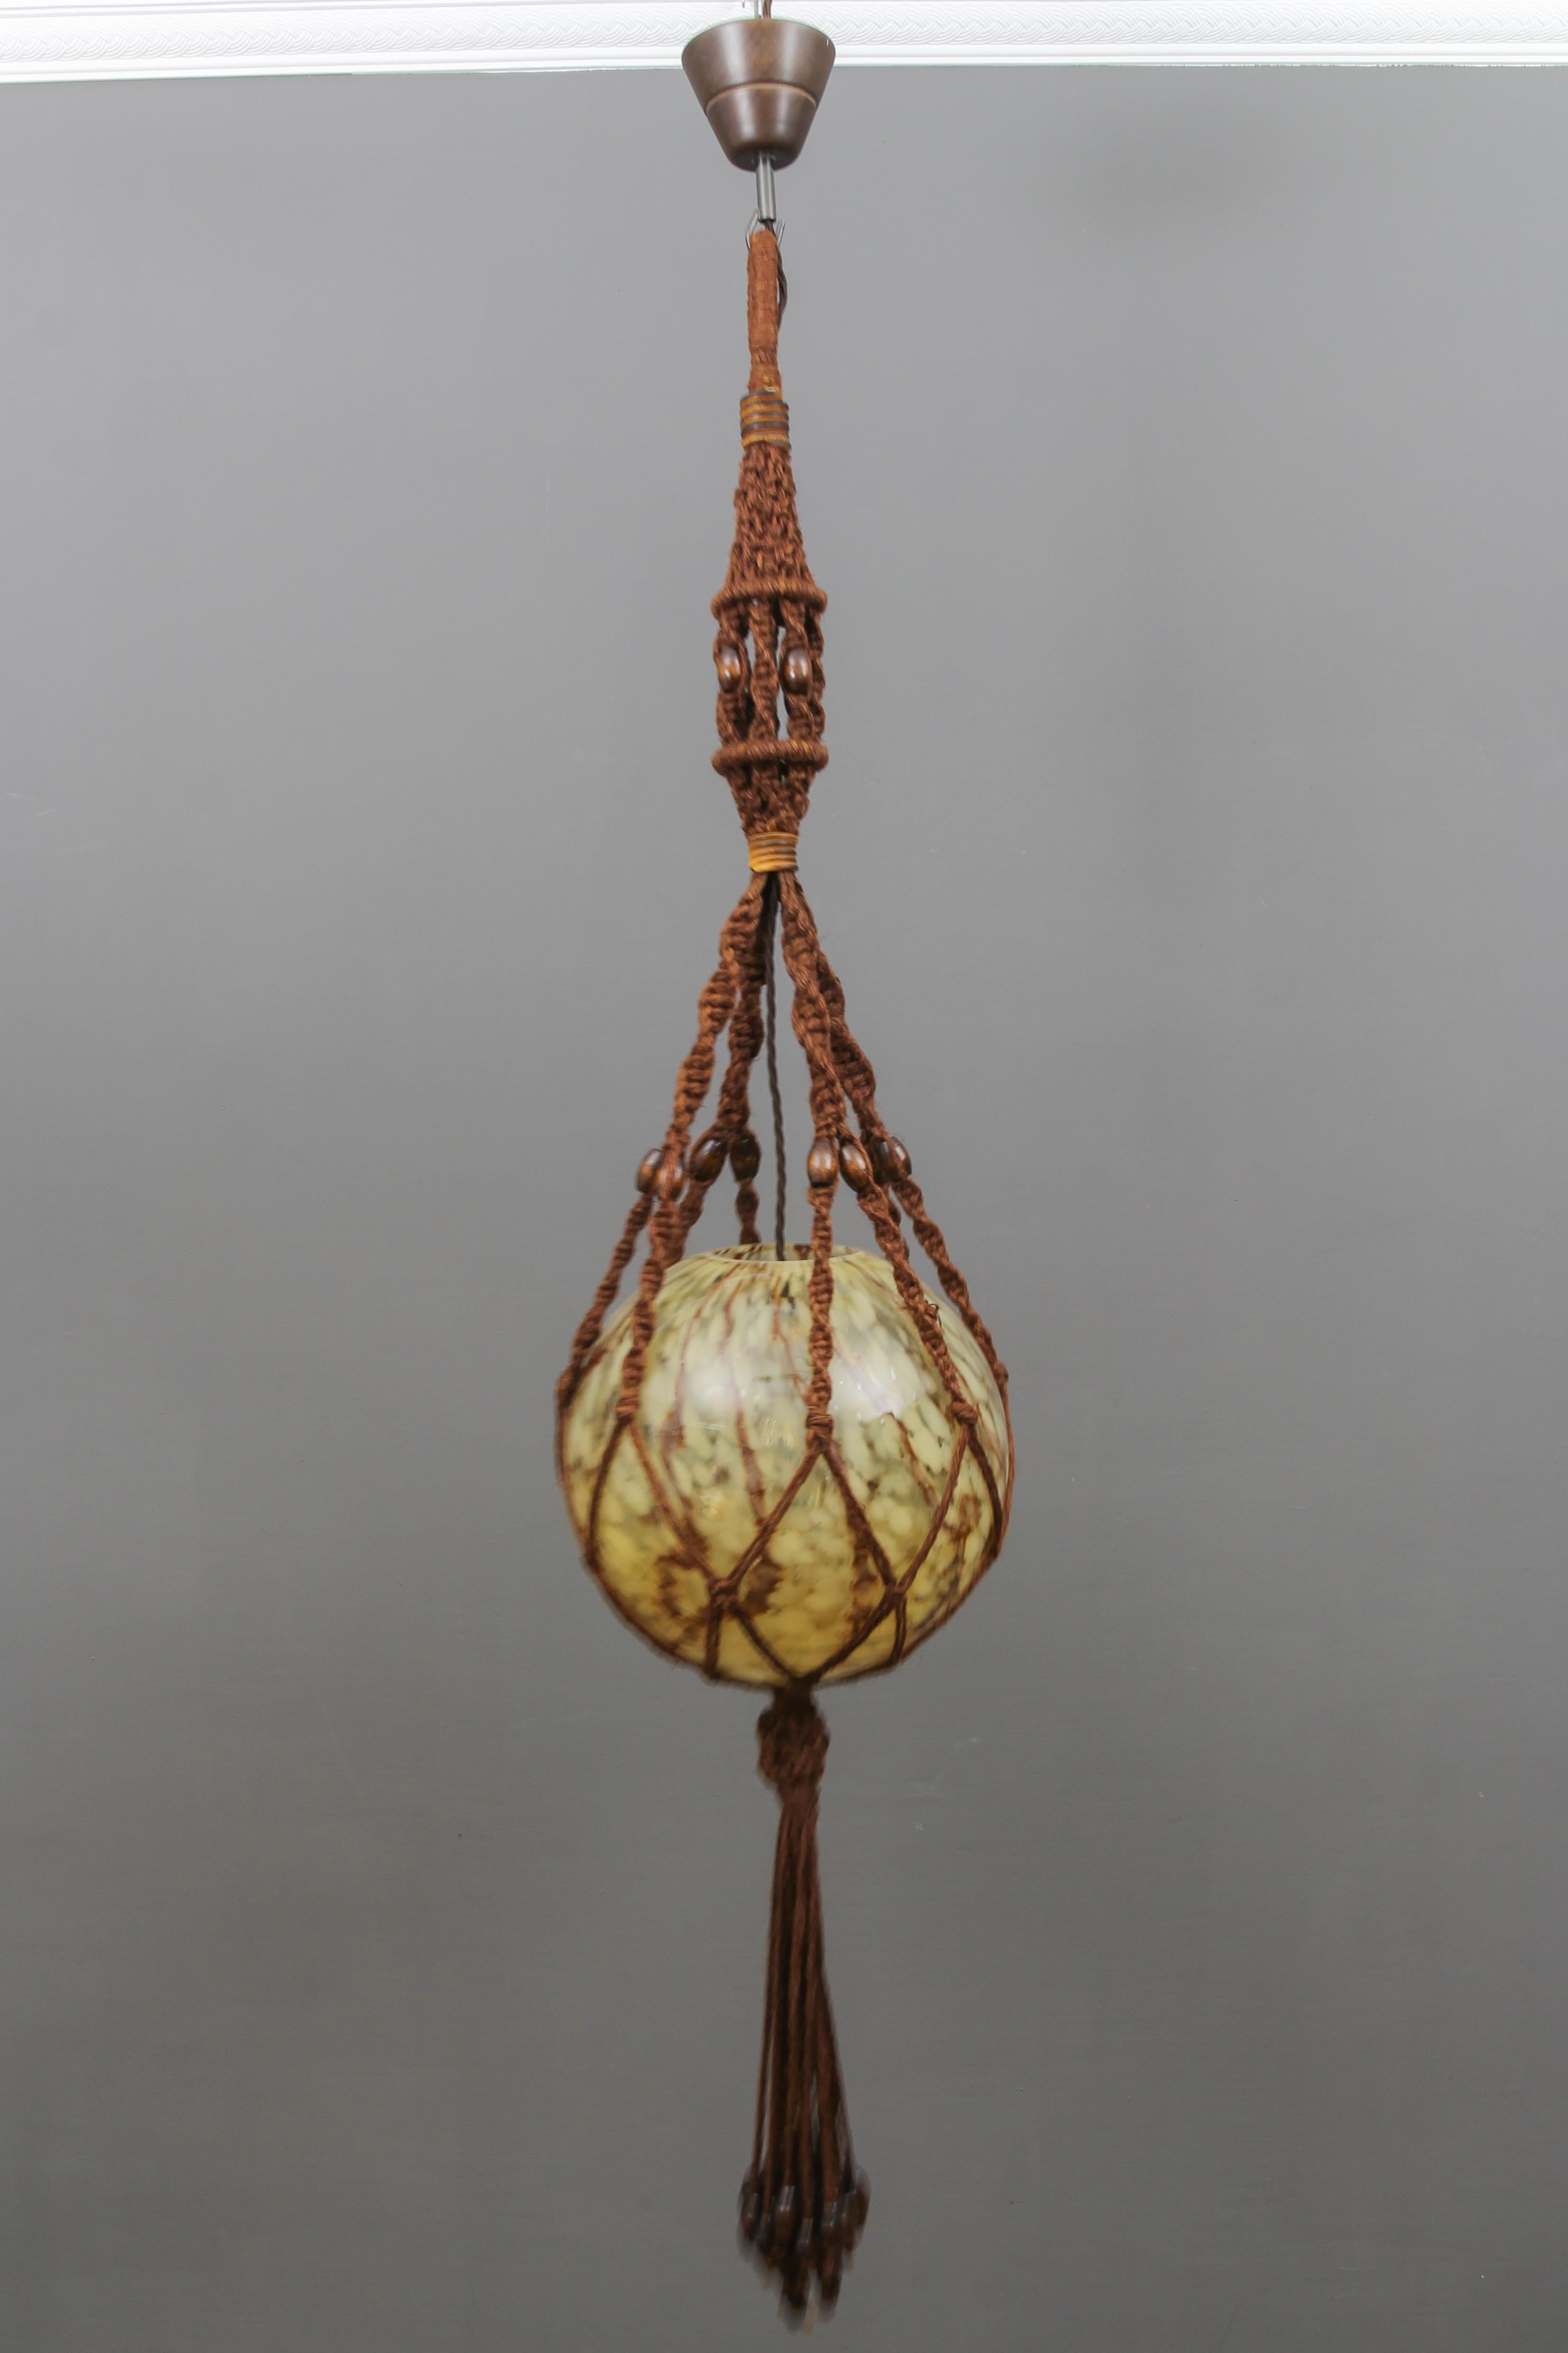 Hand-Crafted Handmade Braided Sisal and Glass Globe Pendant Light Fixture, 1970s For Sale